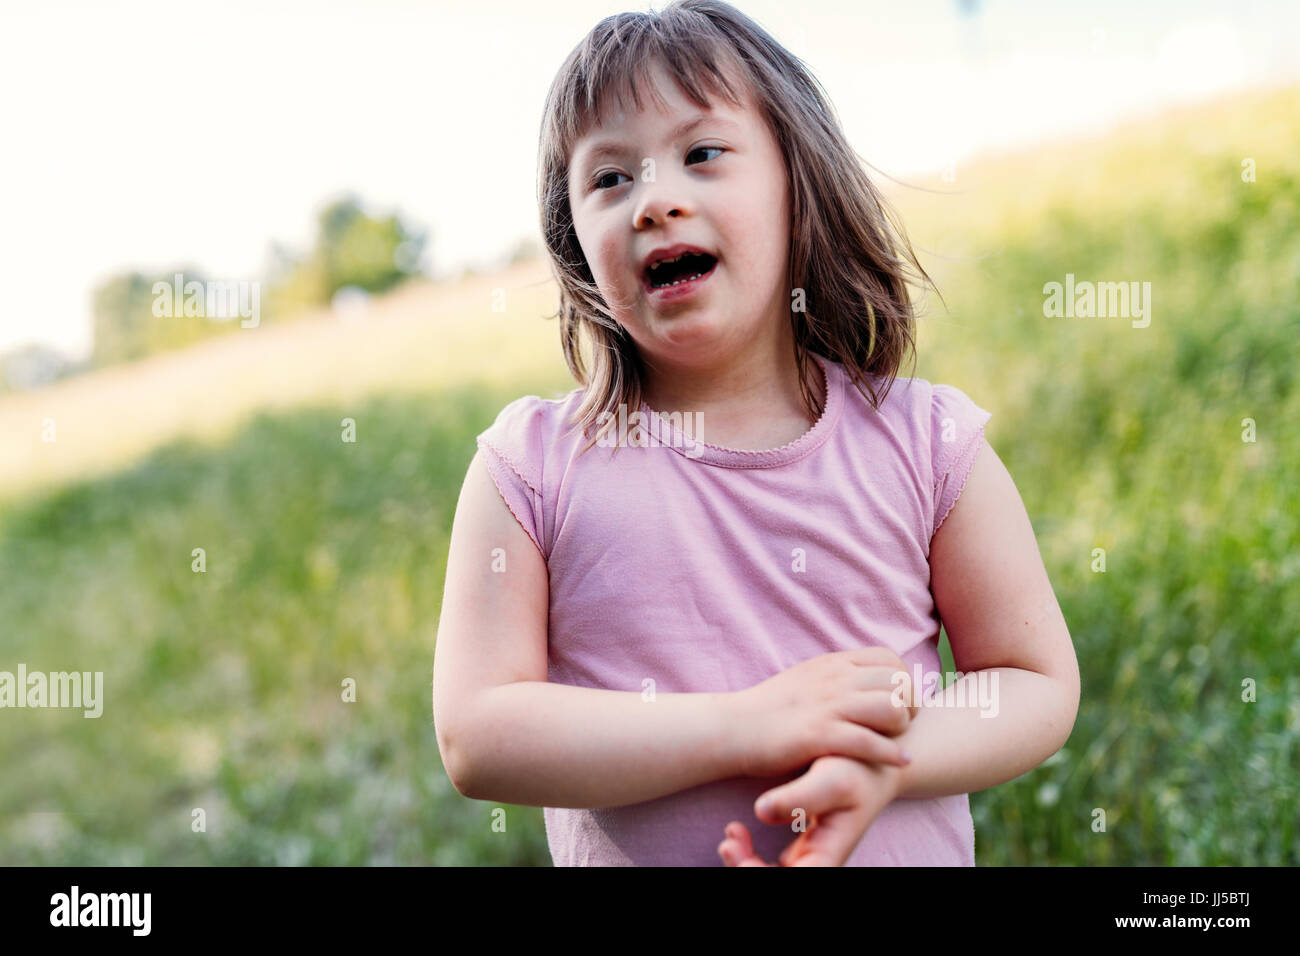 Portrait of young girl with down syndrome Stock Photo